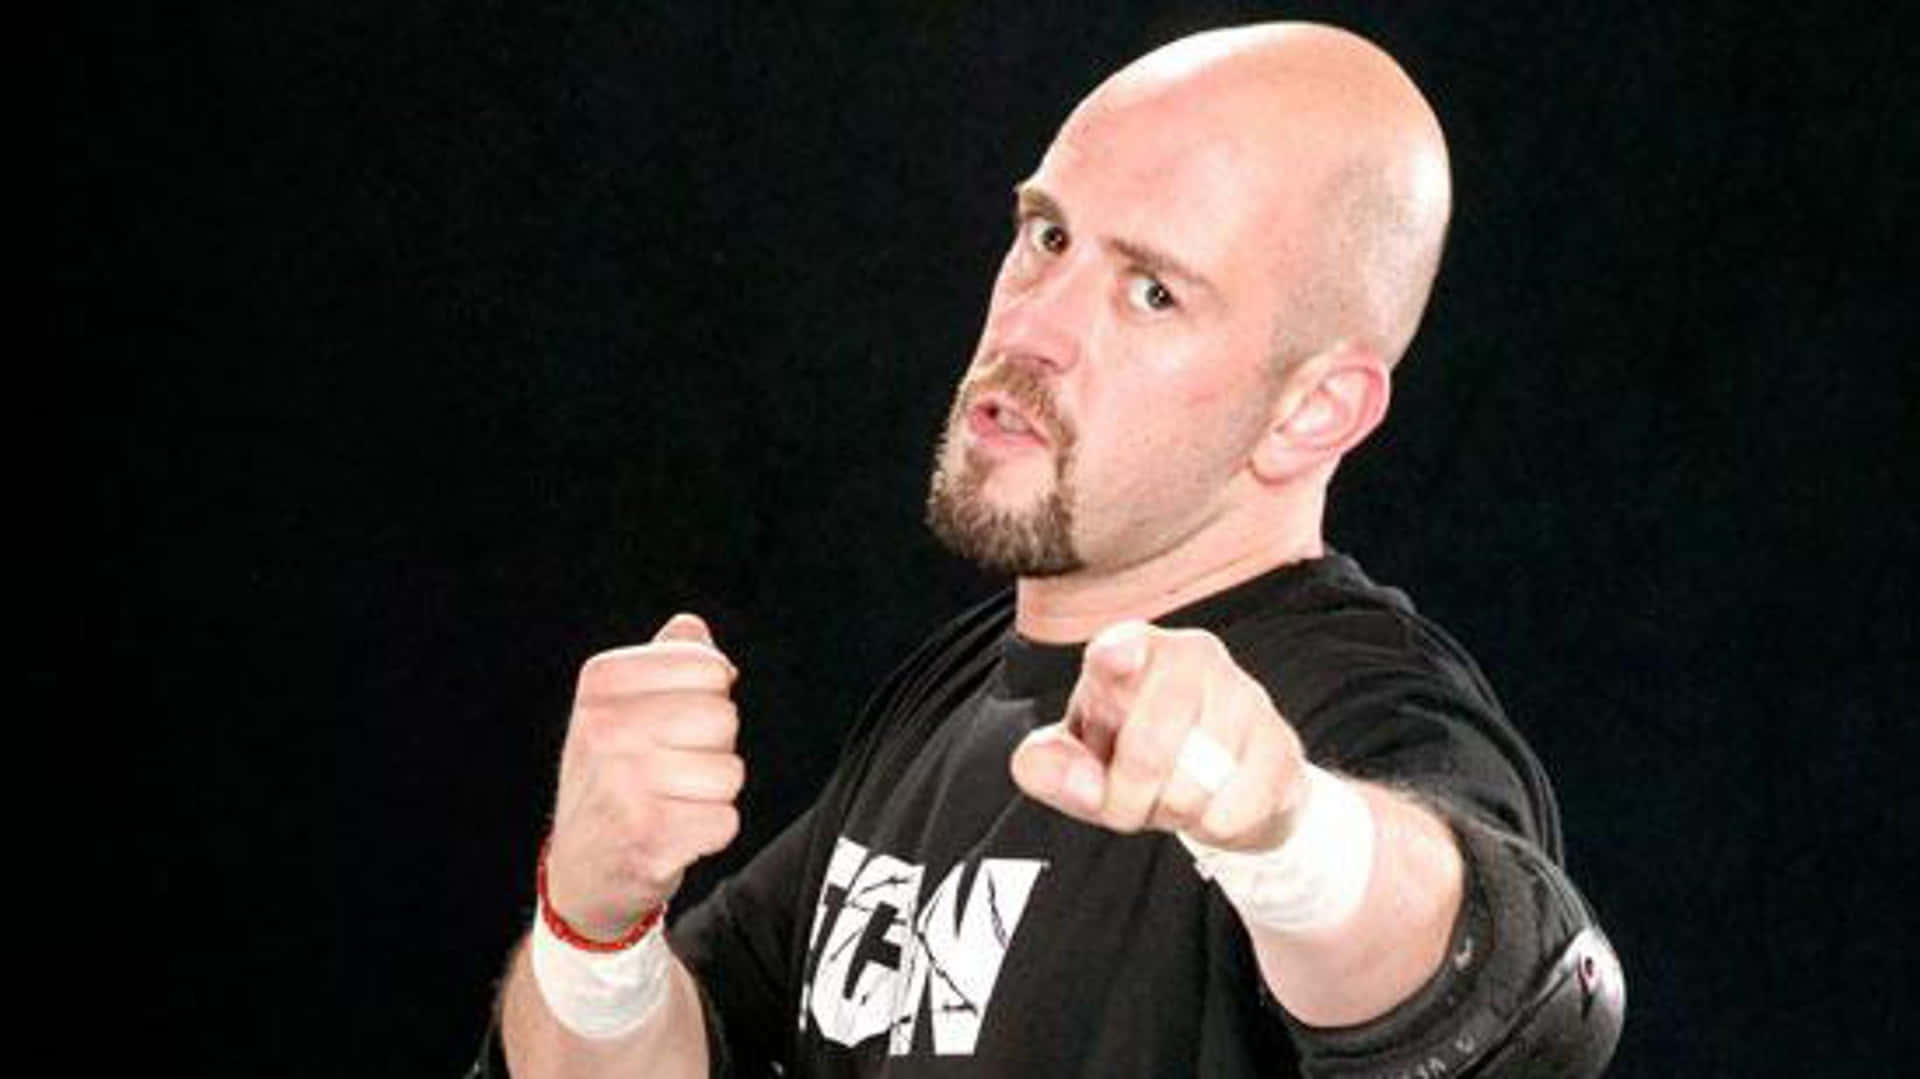 Justin Credible Expressively Pointing with Gesturing Hand Wallpaper